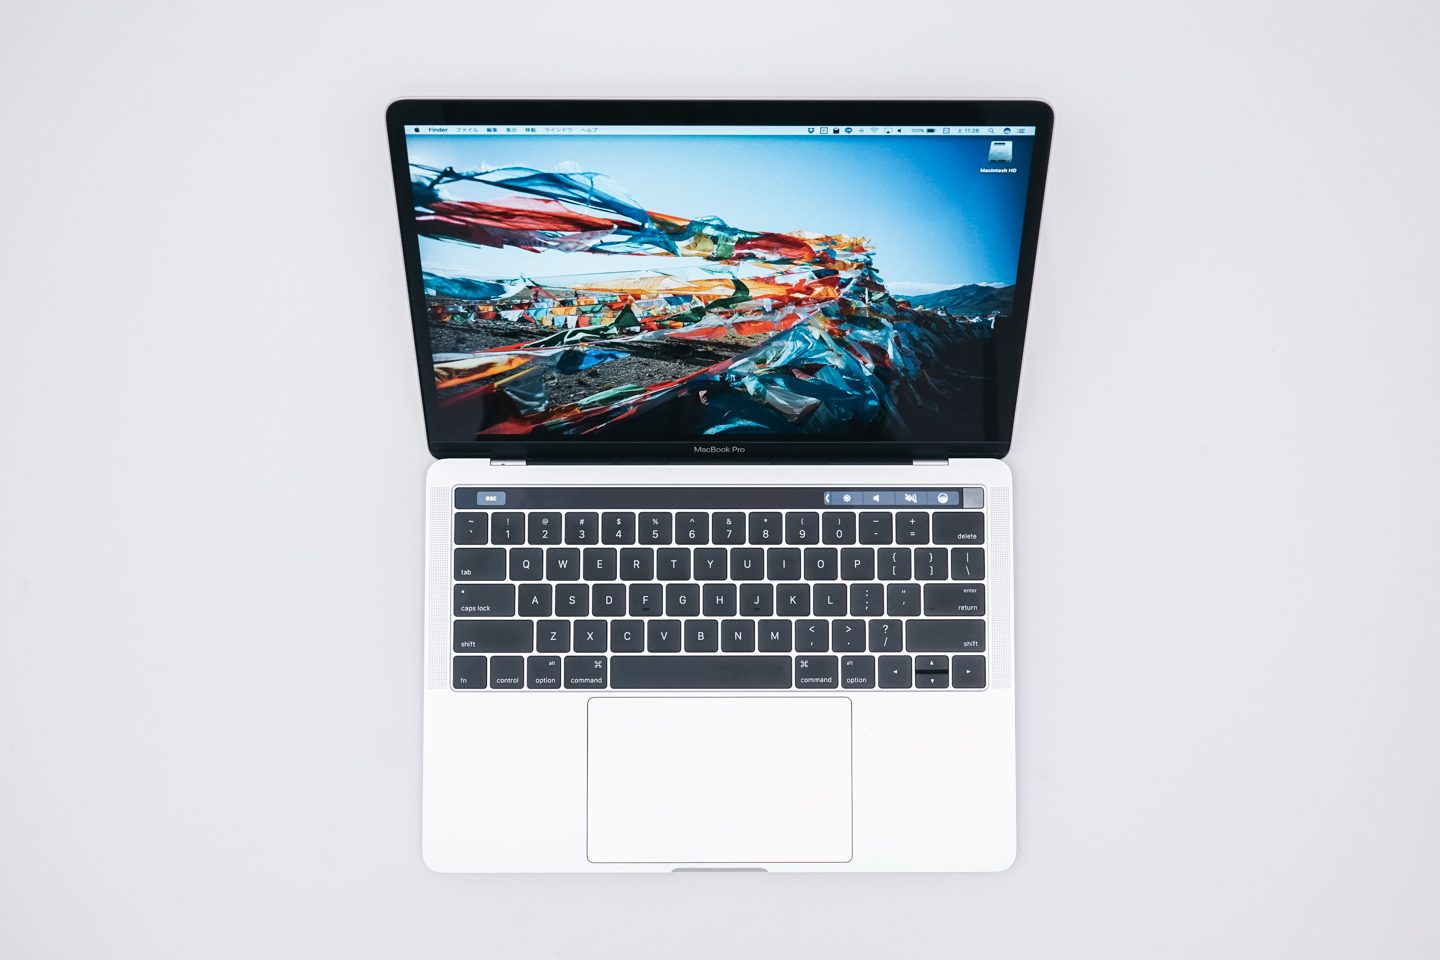 Macbook pro '13 2016 Touch Barモデルを購入、買い替えた6つの理由